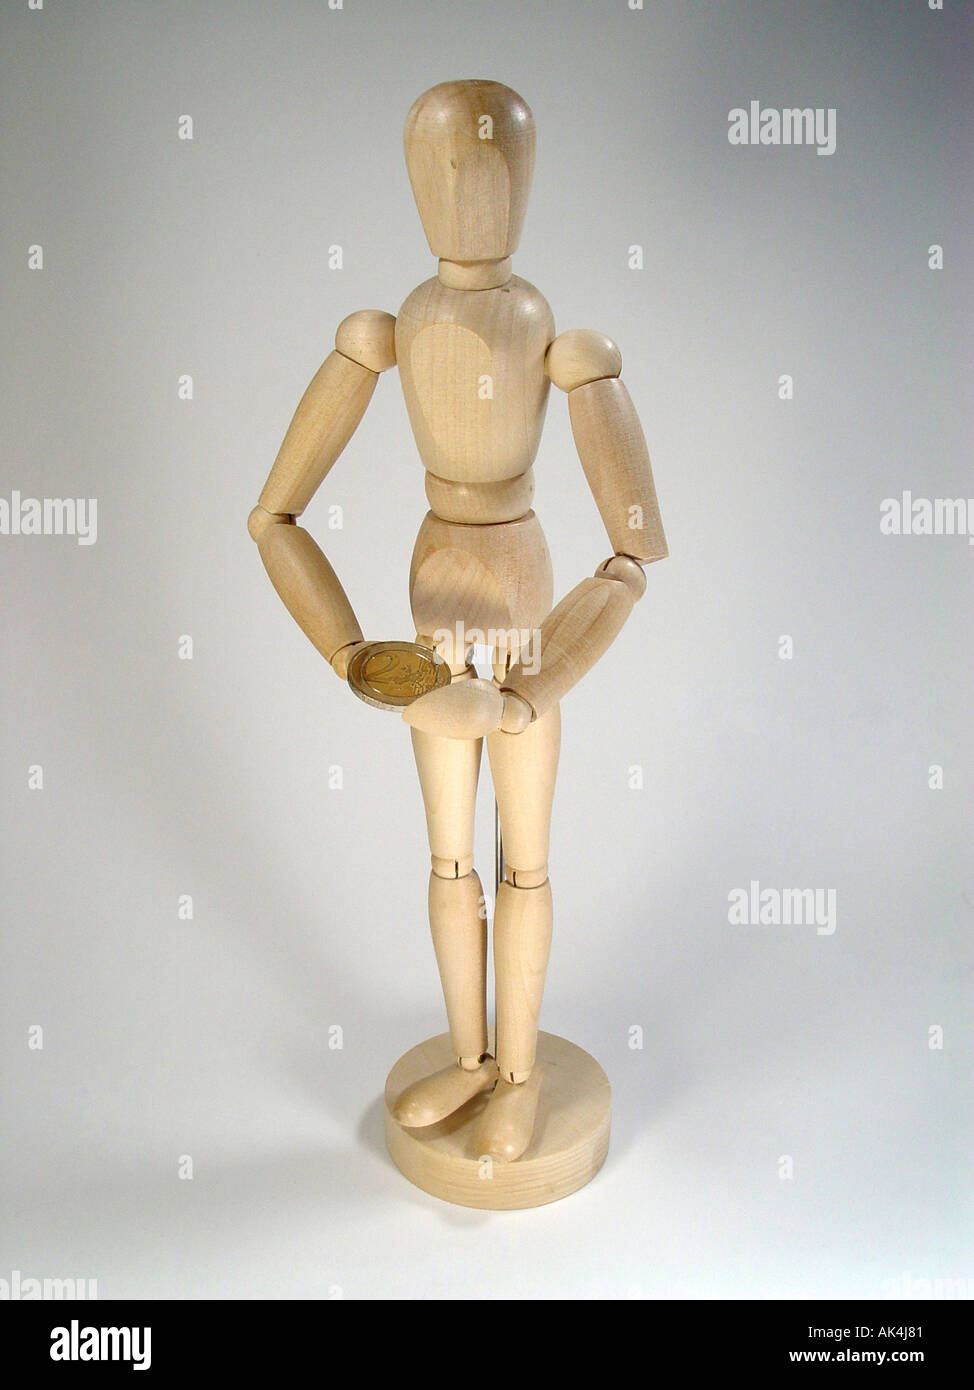 mannequin jointed doll Stock Photo